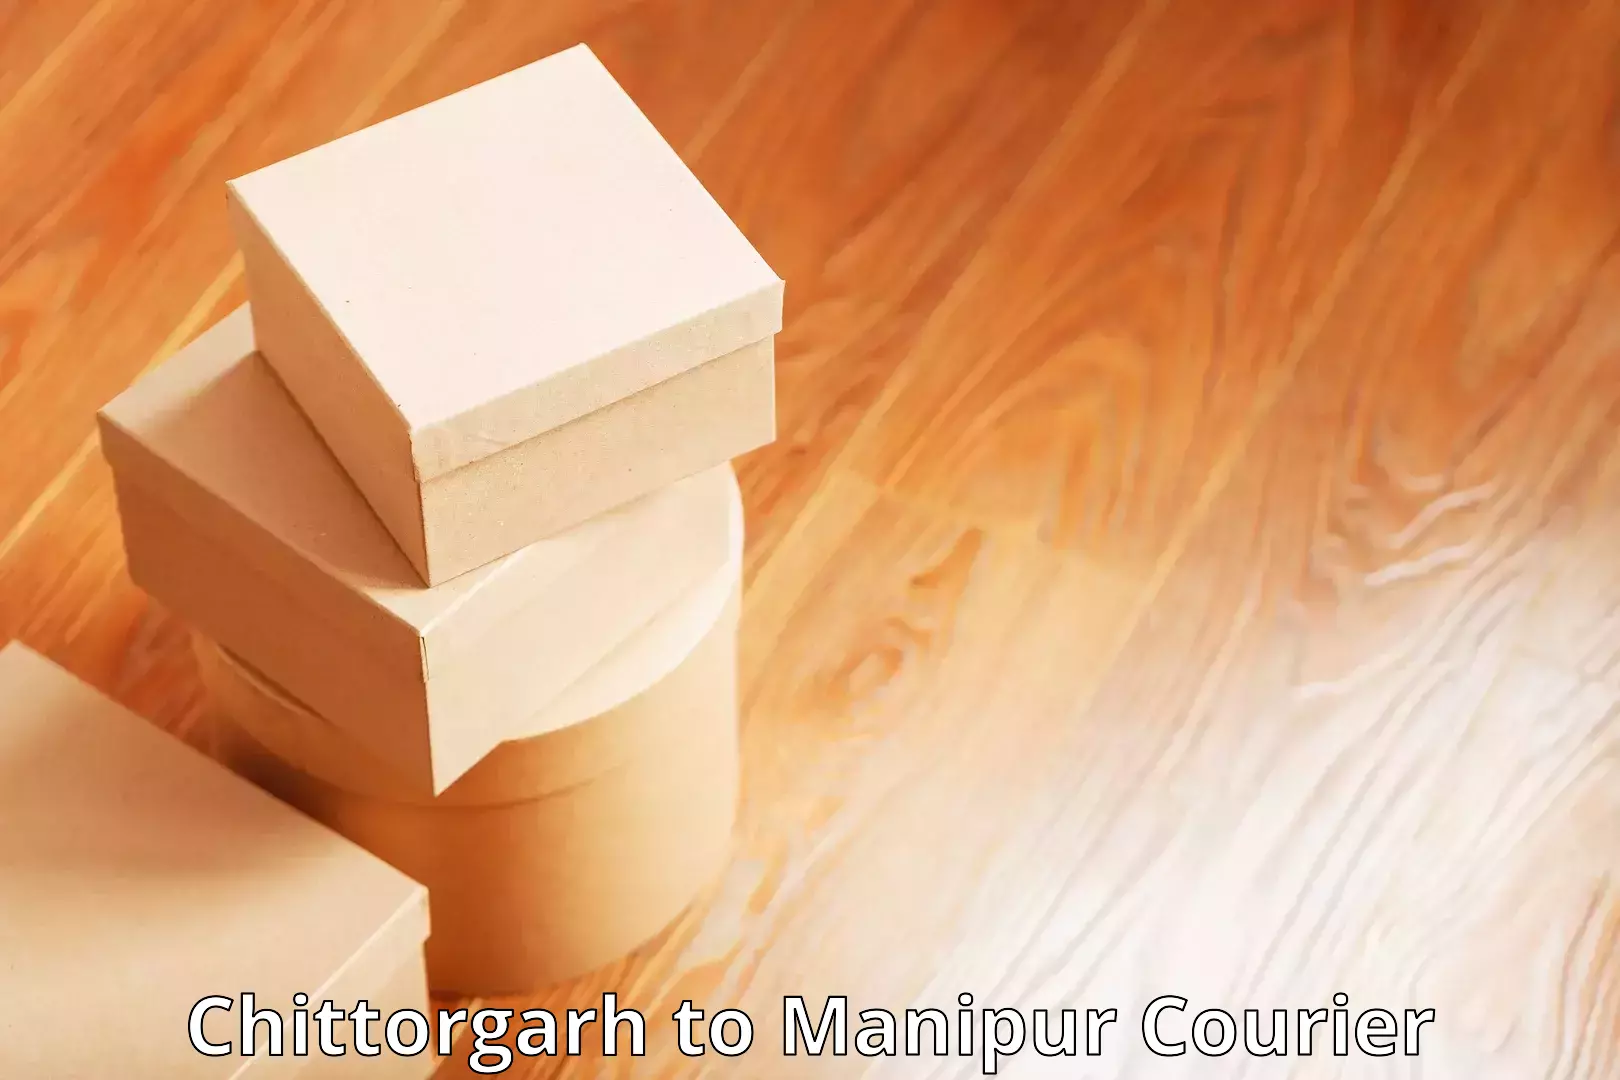 Easy access courier services Chittorgarh to Manipur